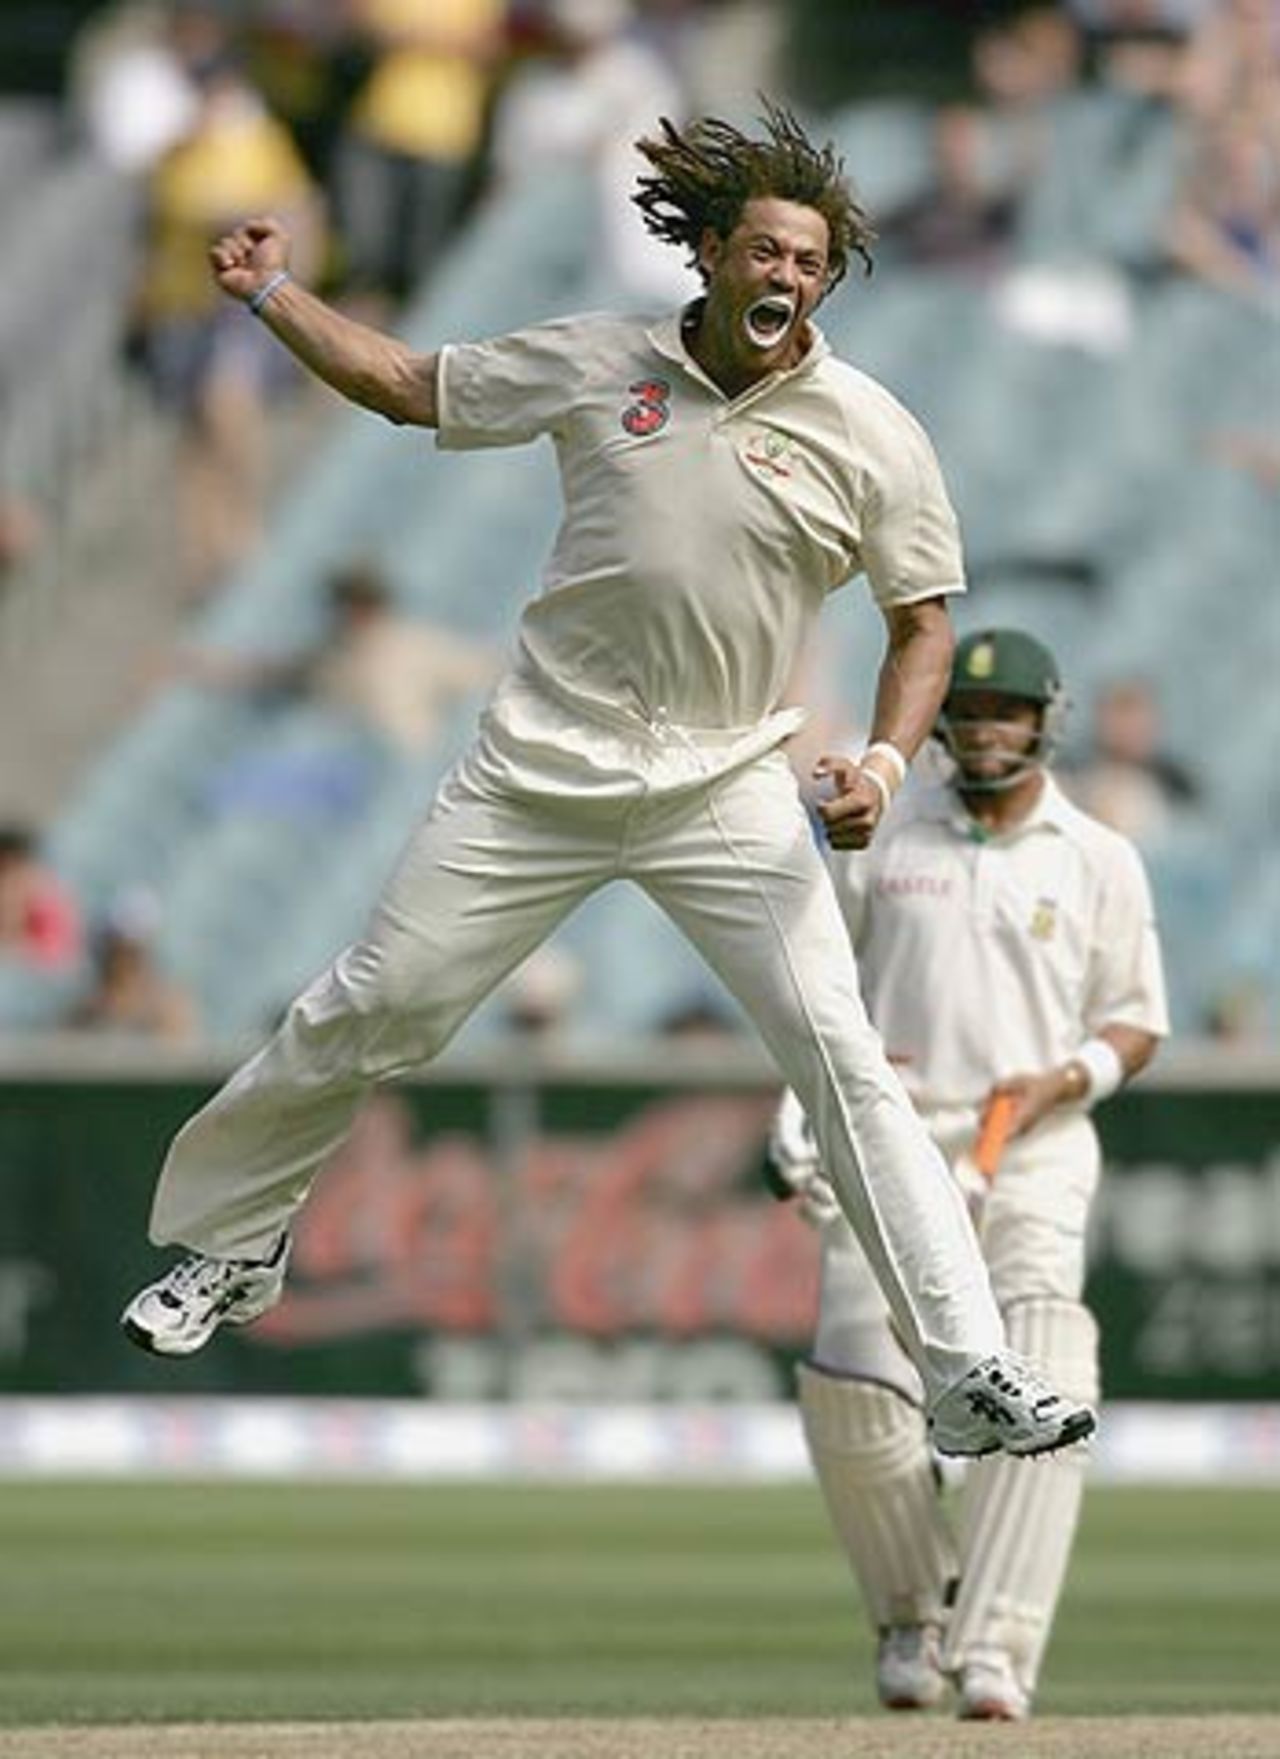 Andrew Symonds is over the moon after dismissing Jacques Kallis, Australia v South Africa, 2nd Test, Melbourne, 4th day, December 29, 2005